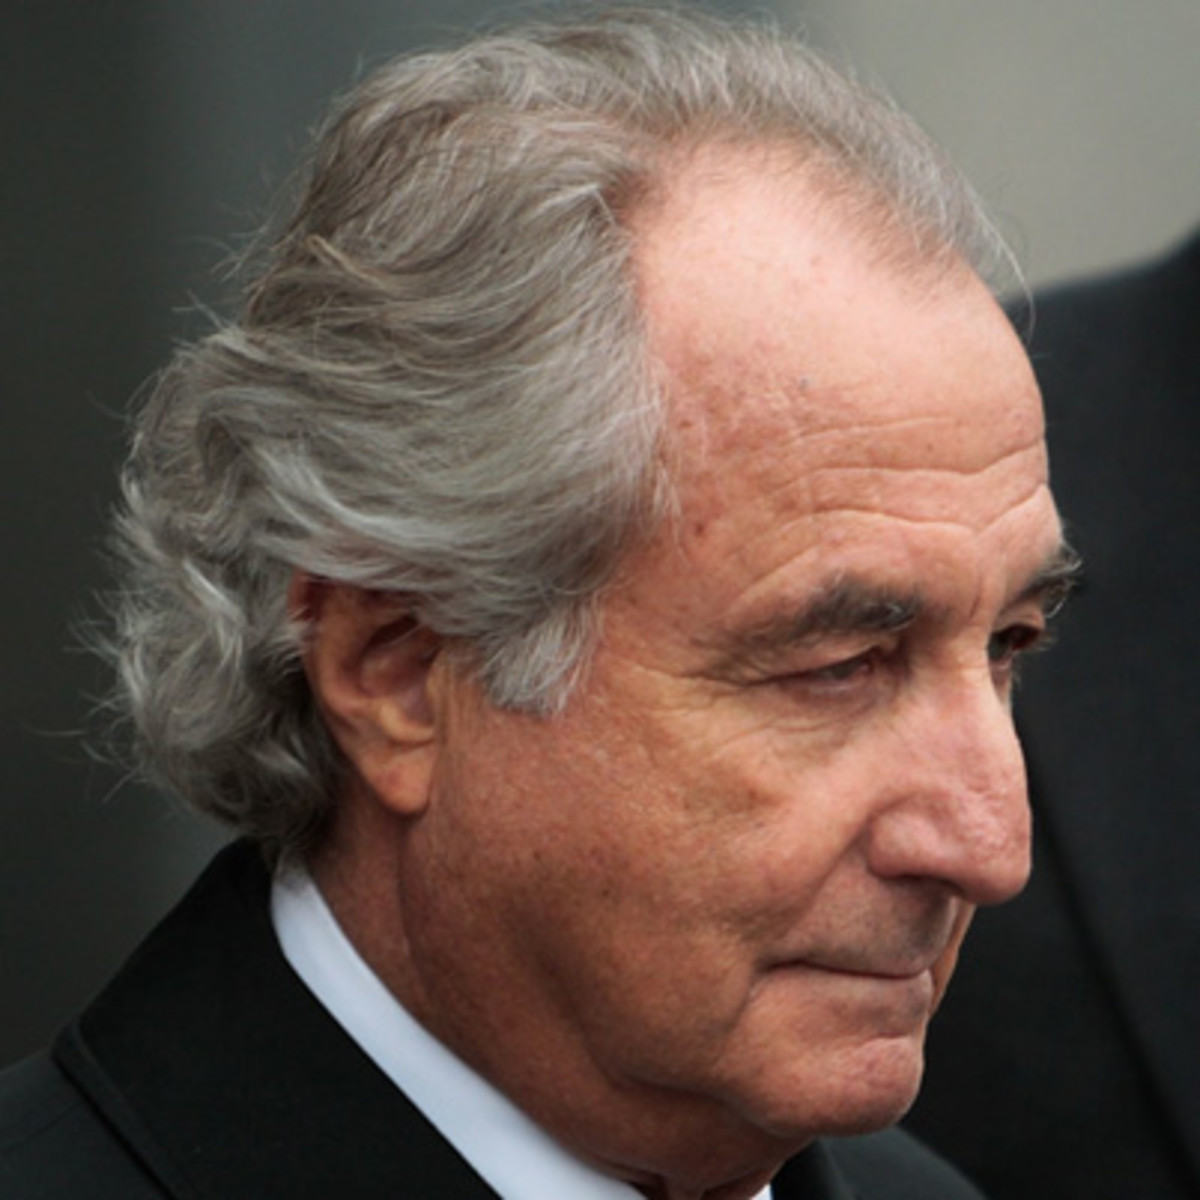 Madoff Ponzi Scheme Truthers Trying to Shield Their Immense Wealth - The Jewish Voice